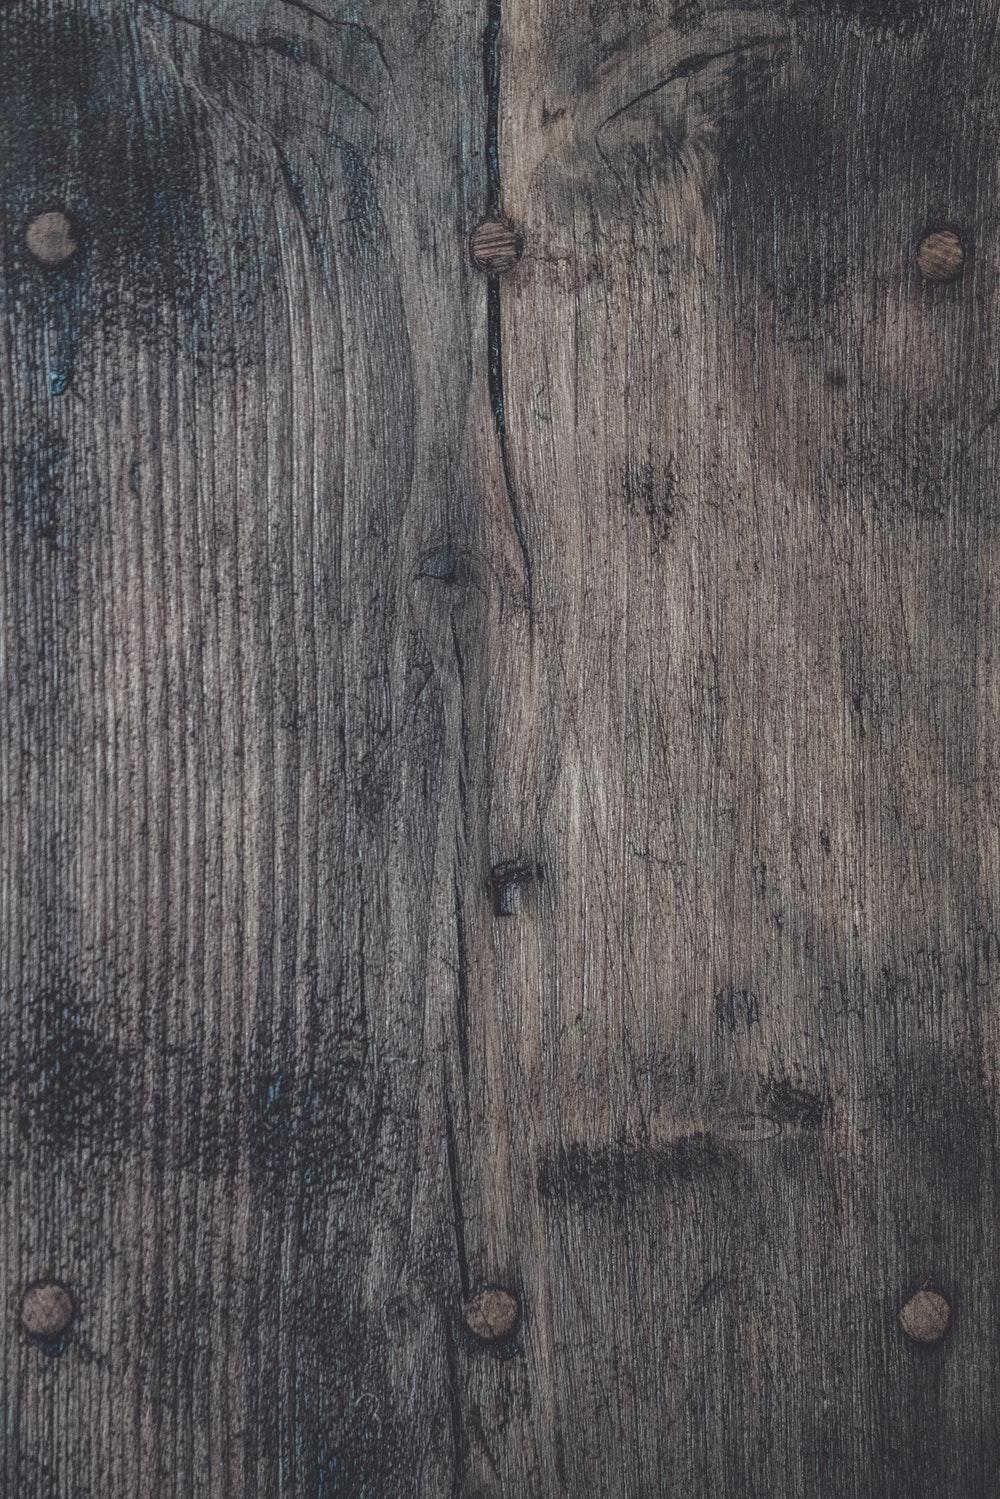 Wood Texture Picture. Download Free Image